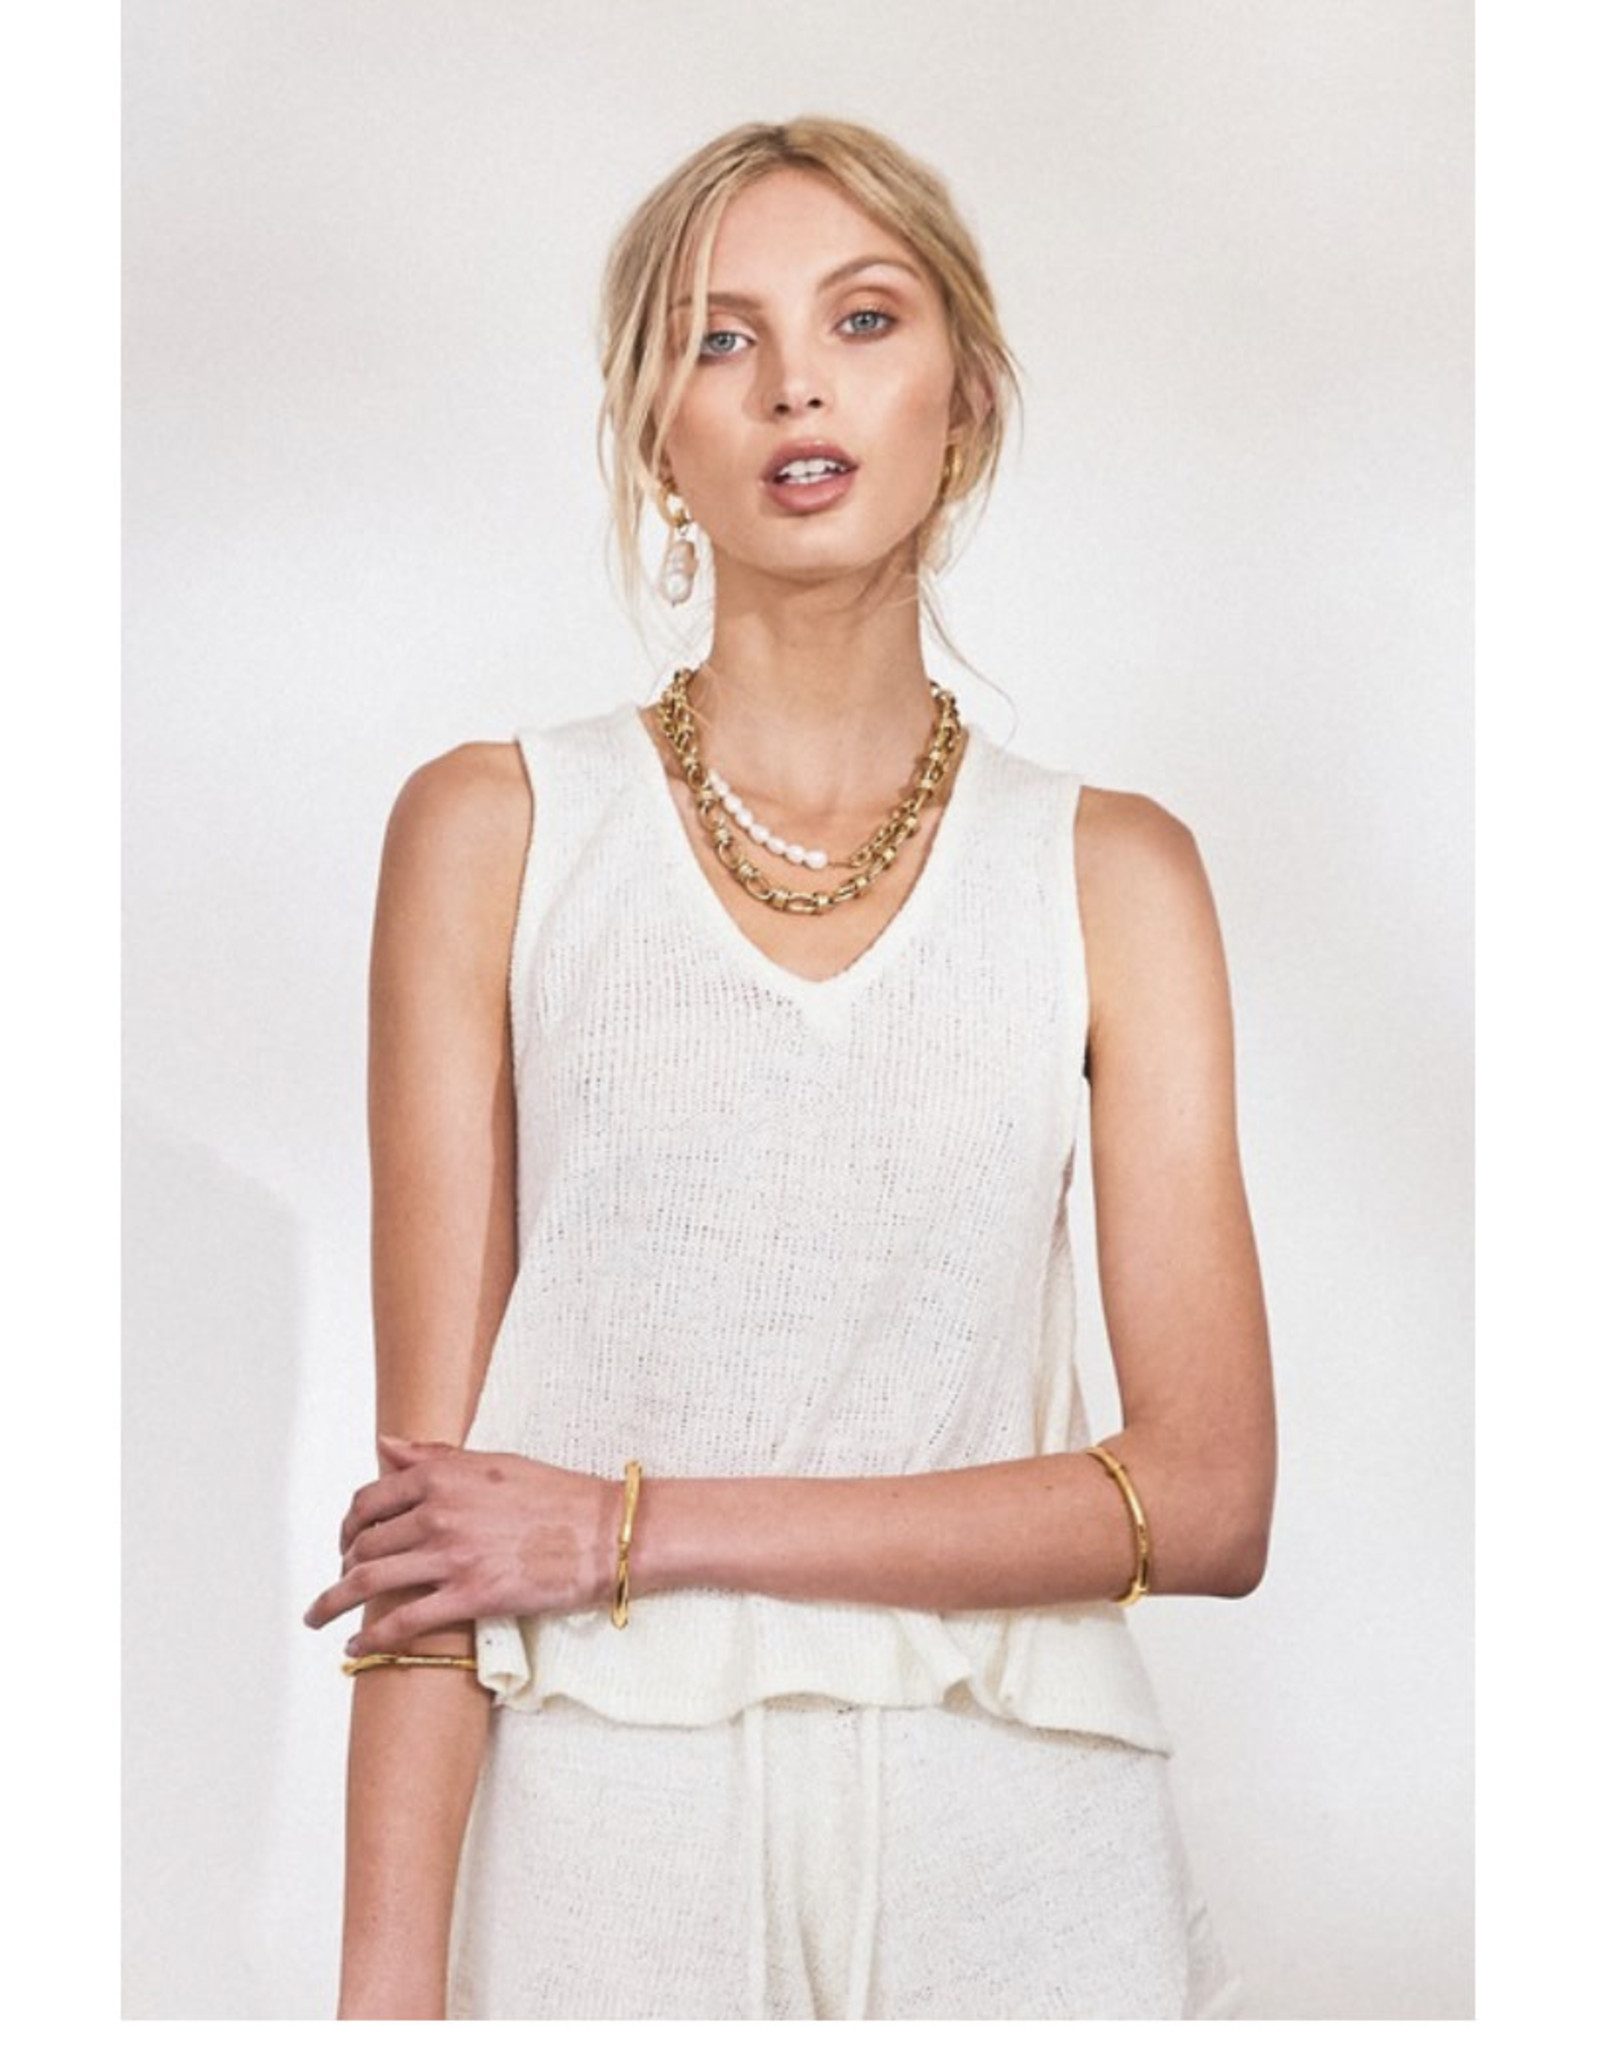 Lost in Lunar Lost in Lunar - Amy knit top (white)